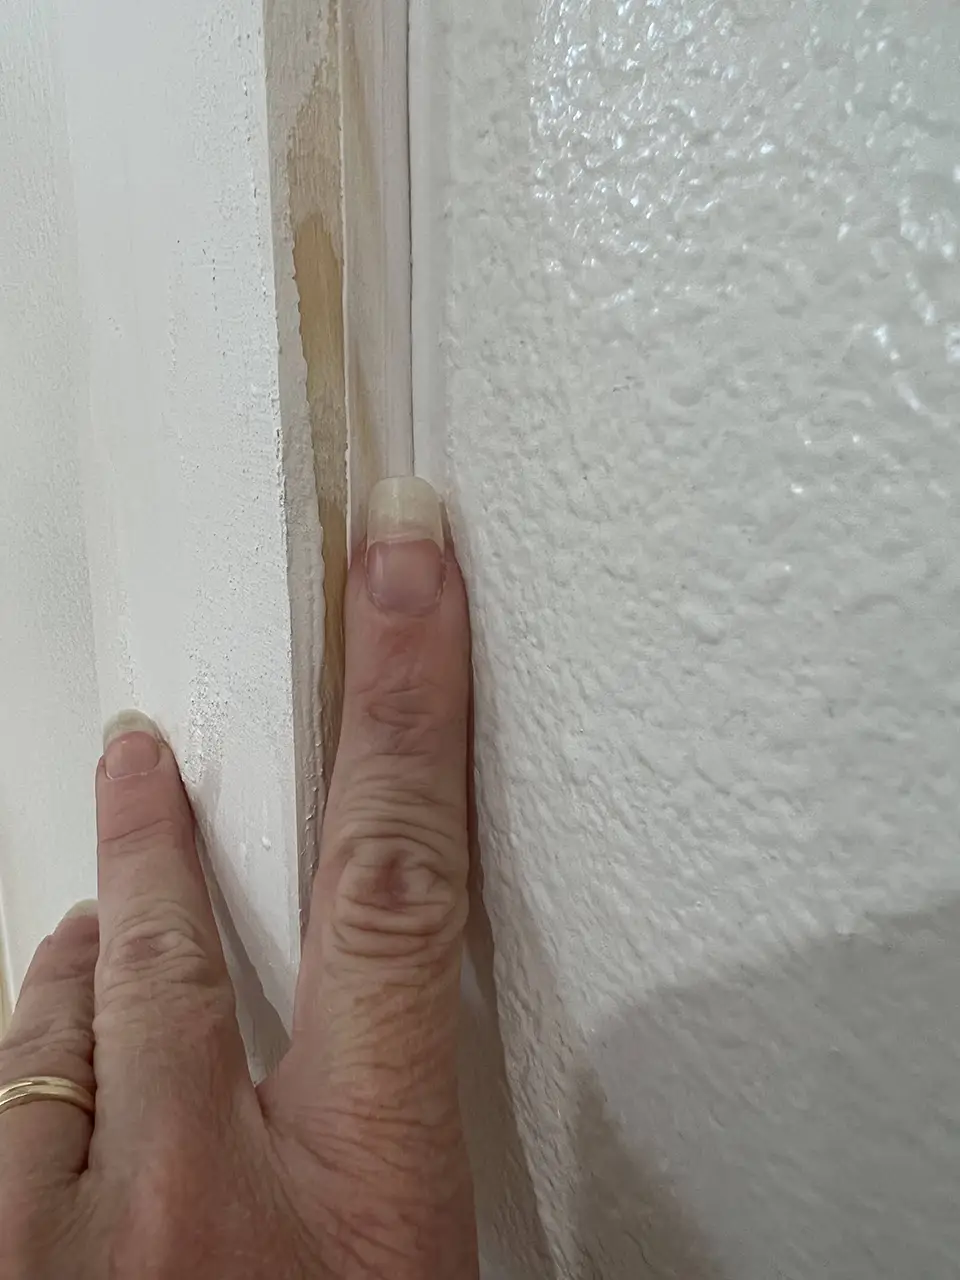 My finger smoothing out the caulking.  Brooke Johnson | The Junk Parlor | Old stuff and cool junk for your home | Business Coach for Antique Dealers | thejunkparlor.com